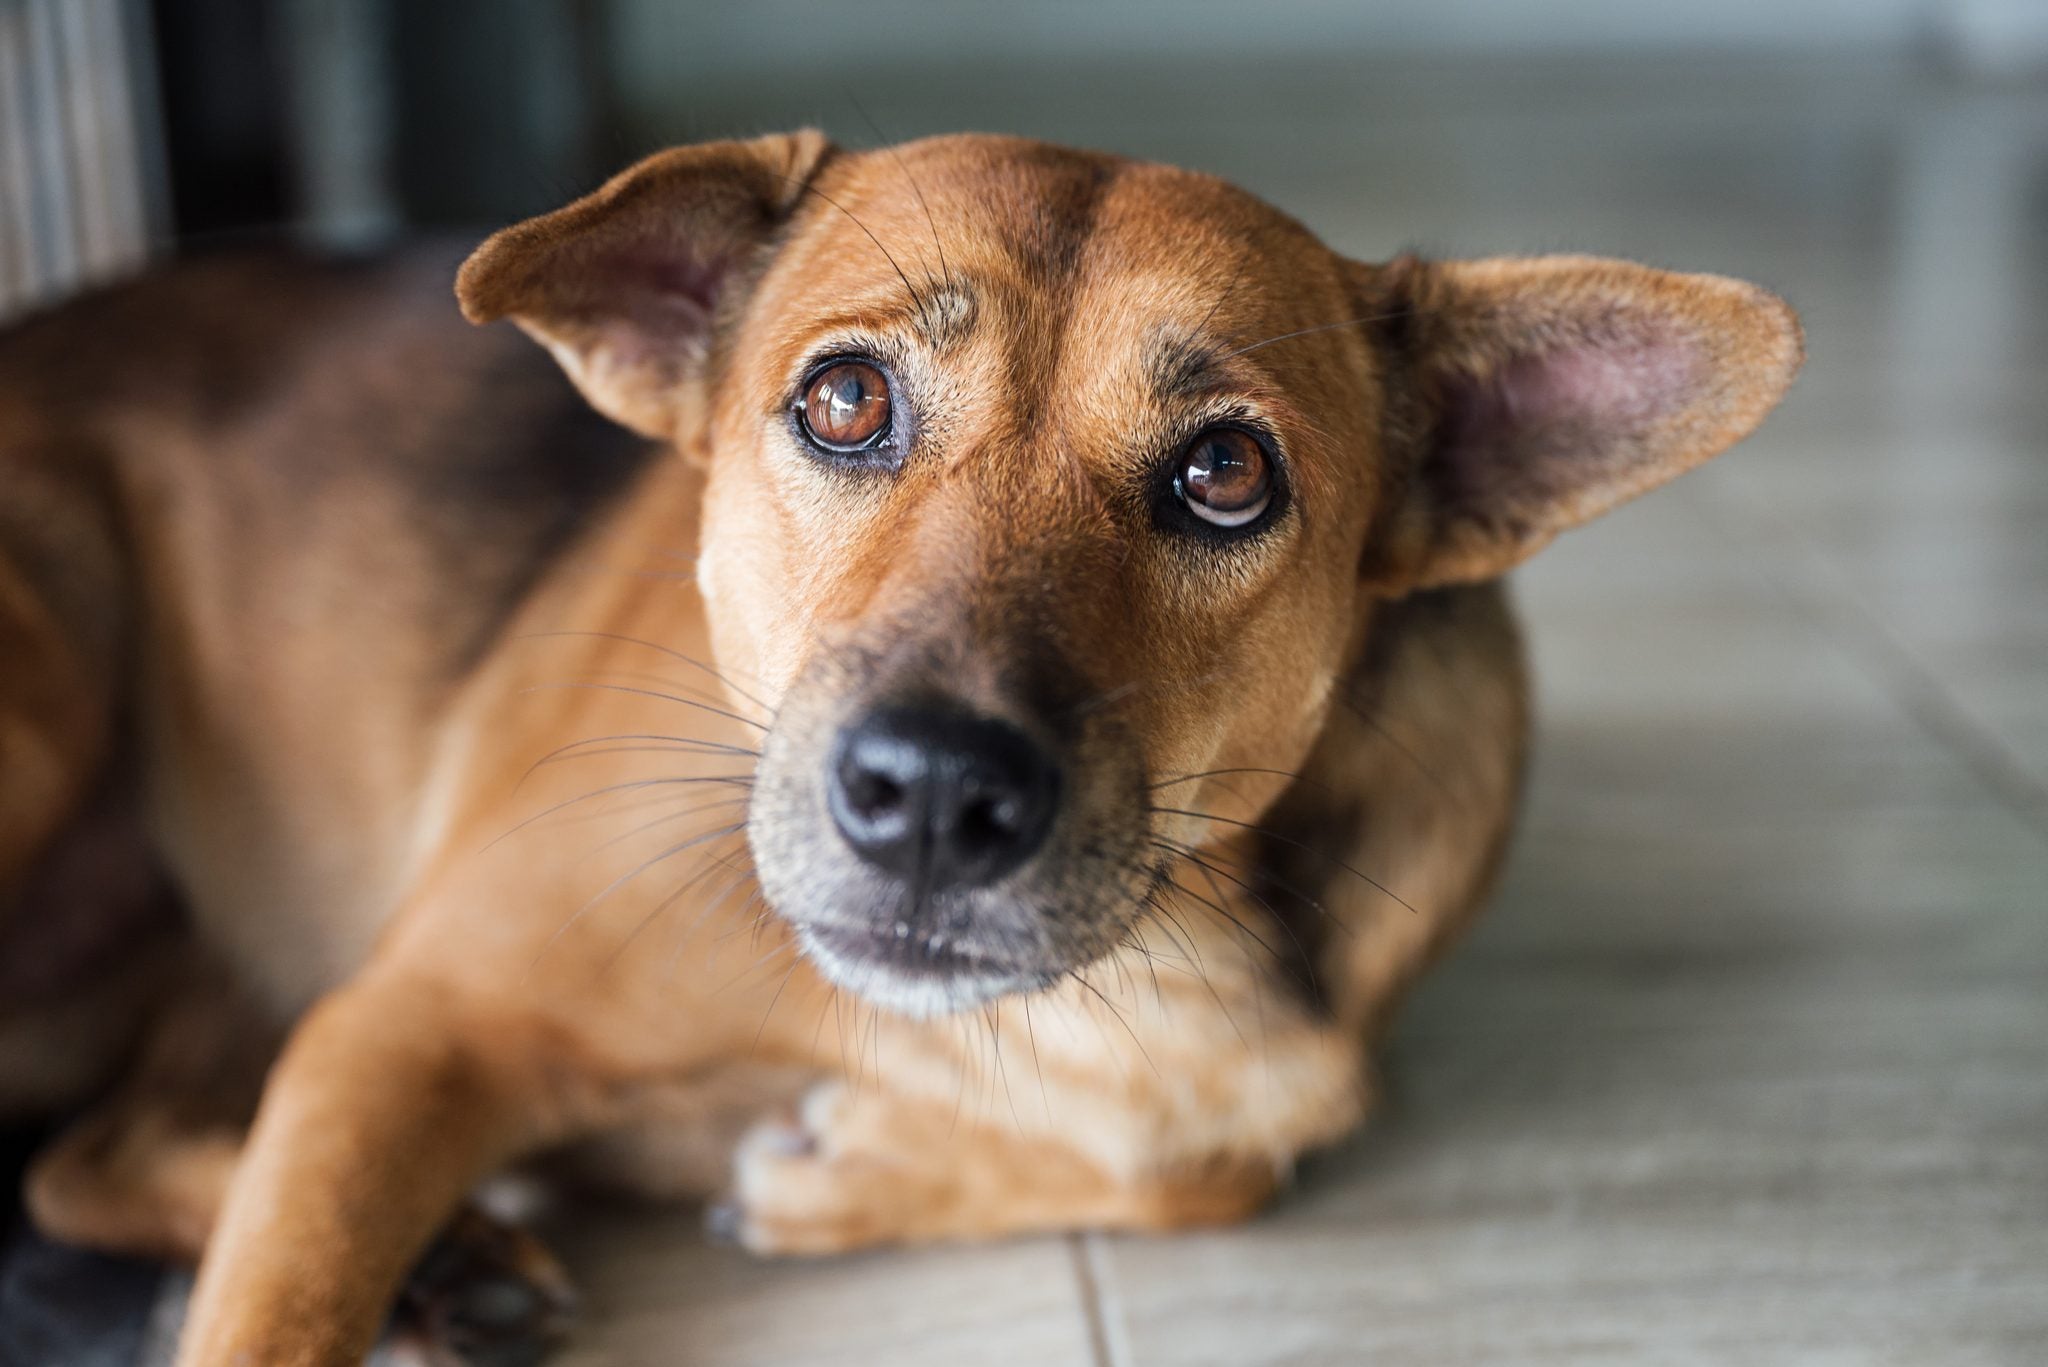 Common Fears & Phobias in Dogs and How to Help Treat Them